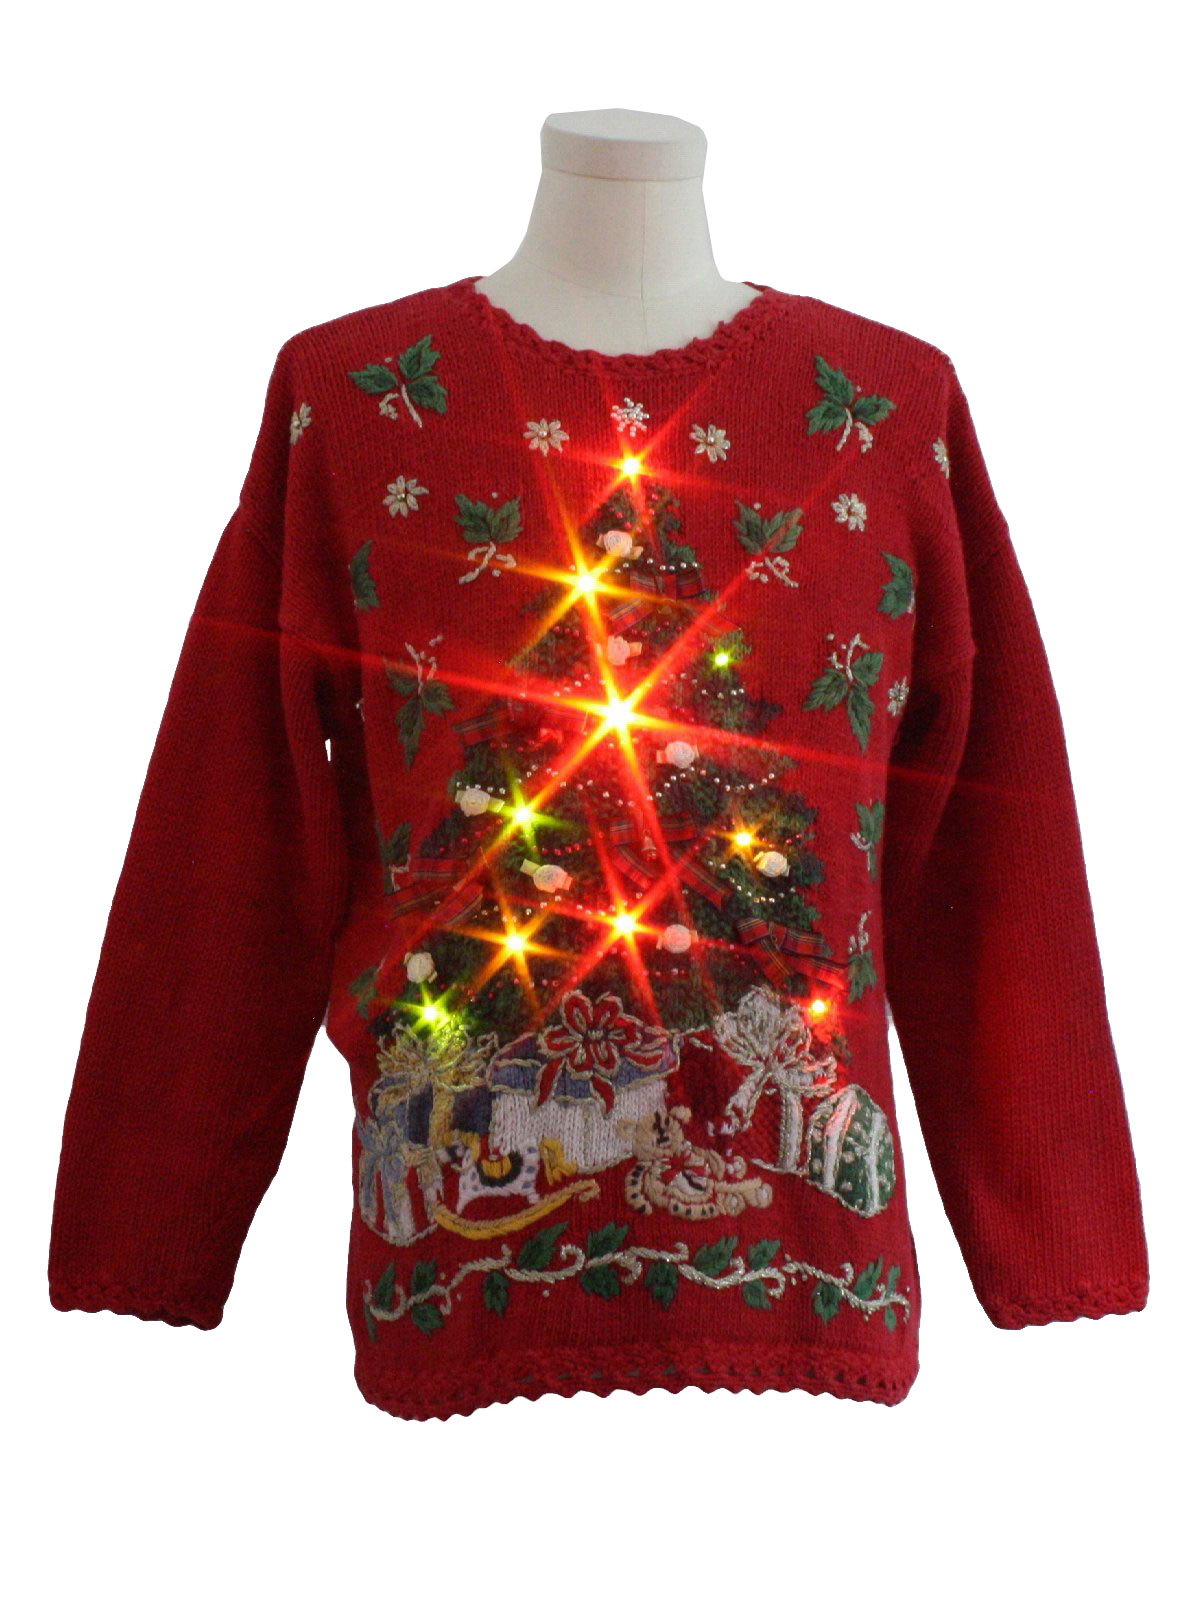 Lightup Ugly Christmas Sweater : -Heirloom Collectibles- Unisex red ...